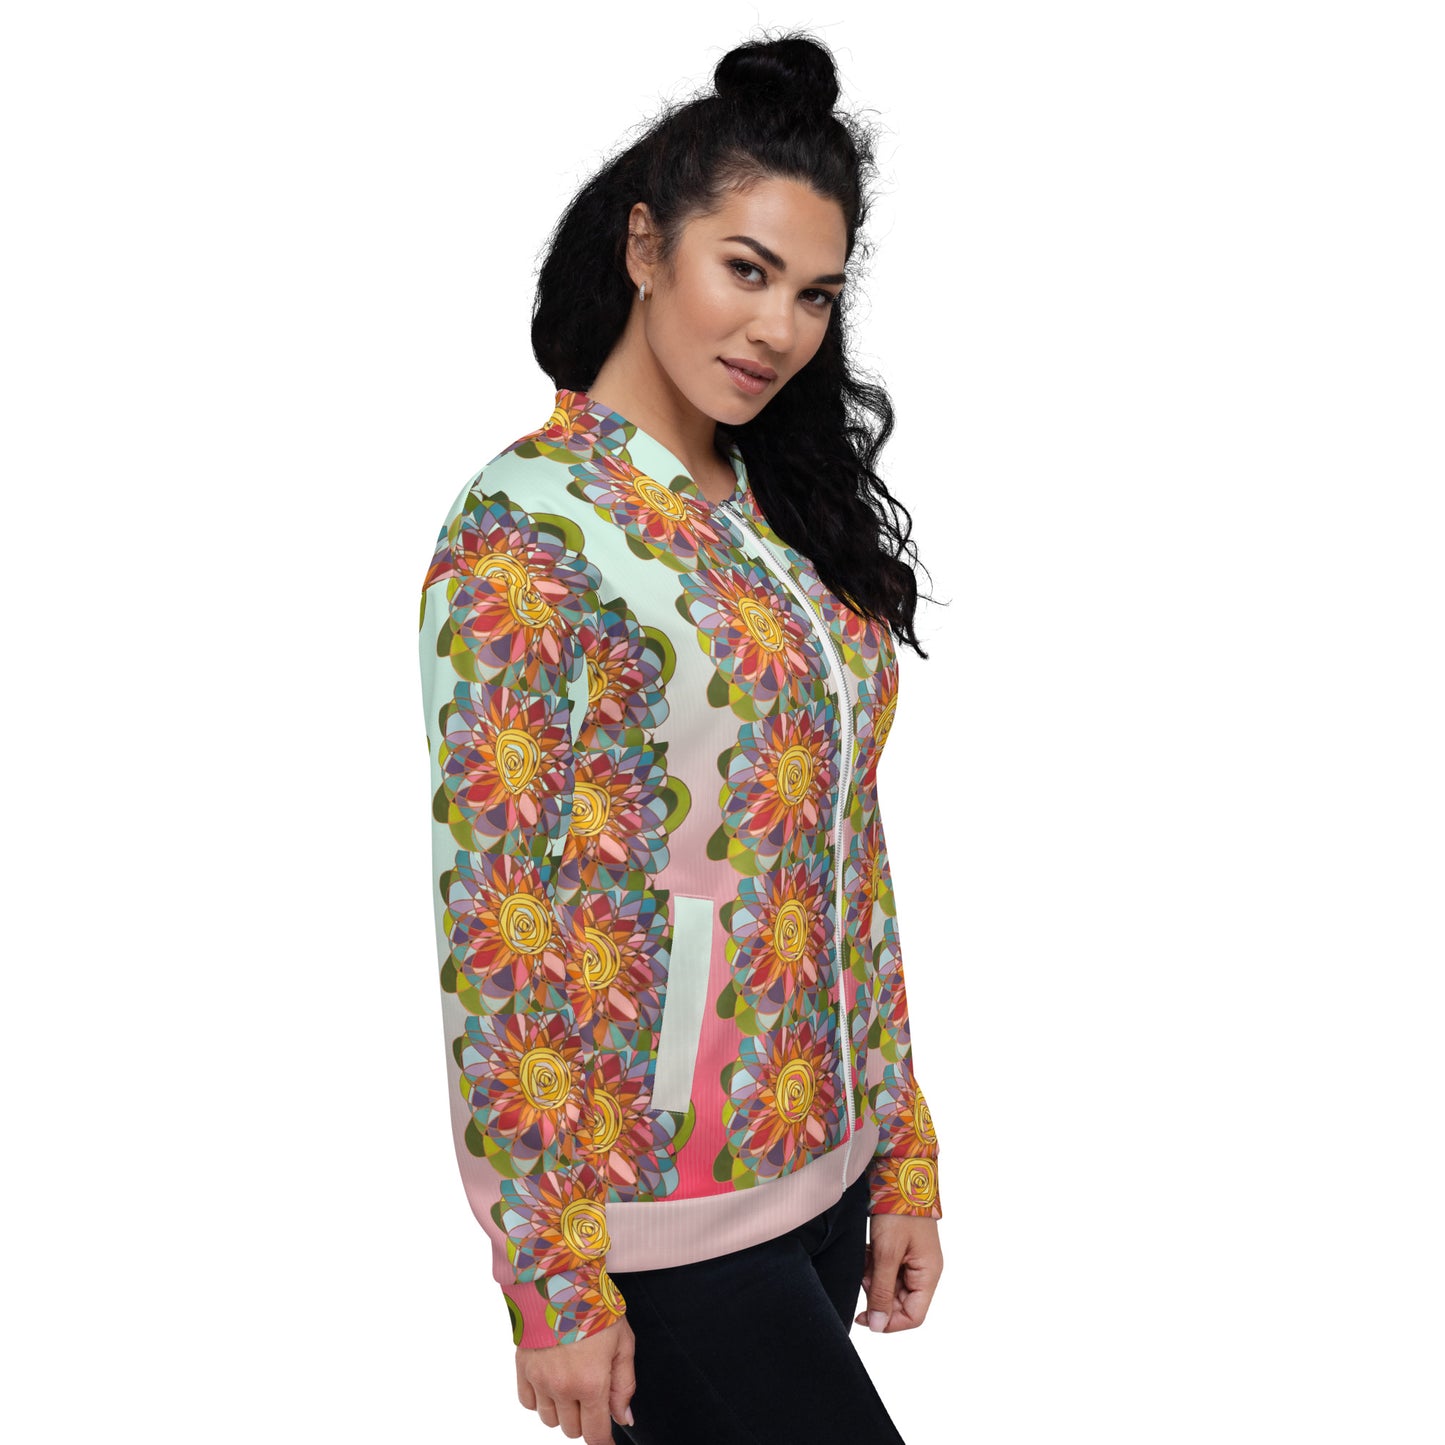 Swirl Flower in Rainbow (Green and Pink) Unisex Bomber Jacket